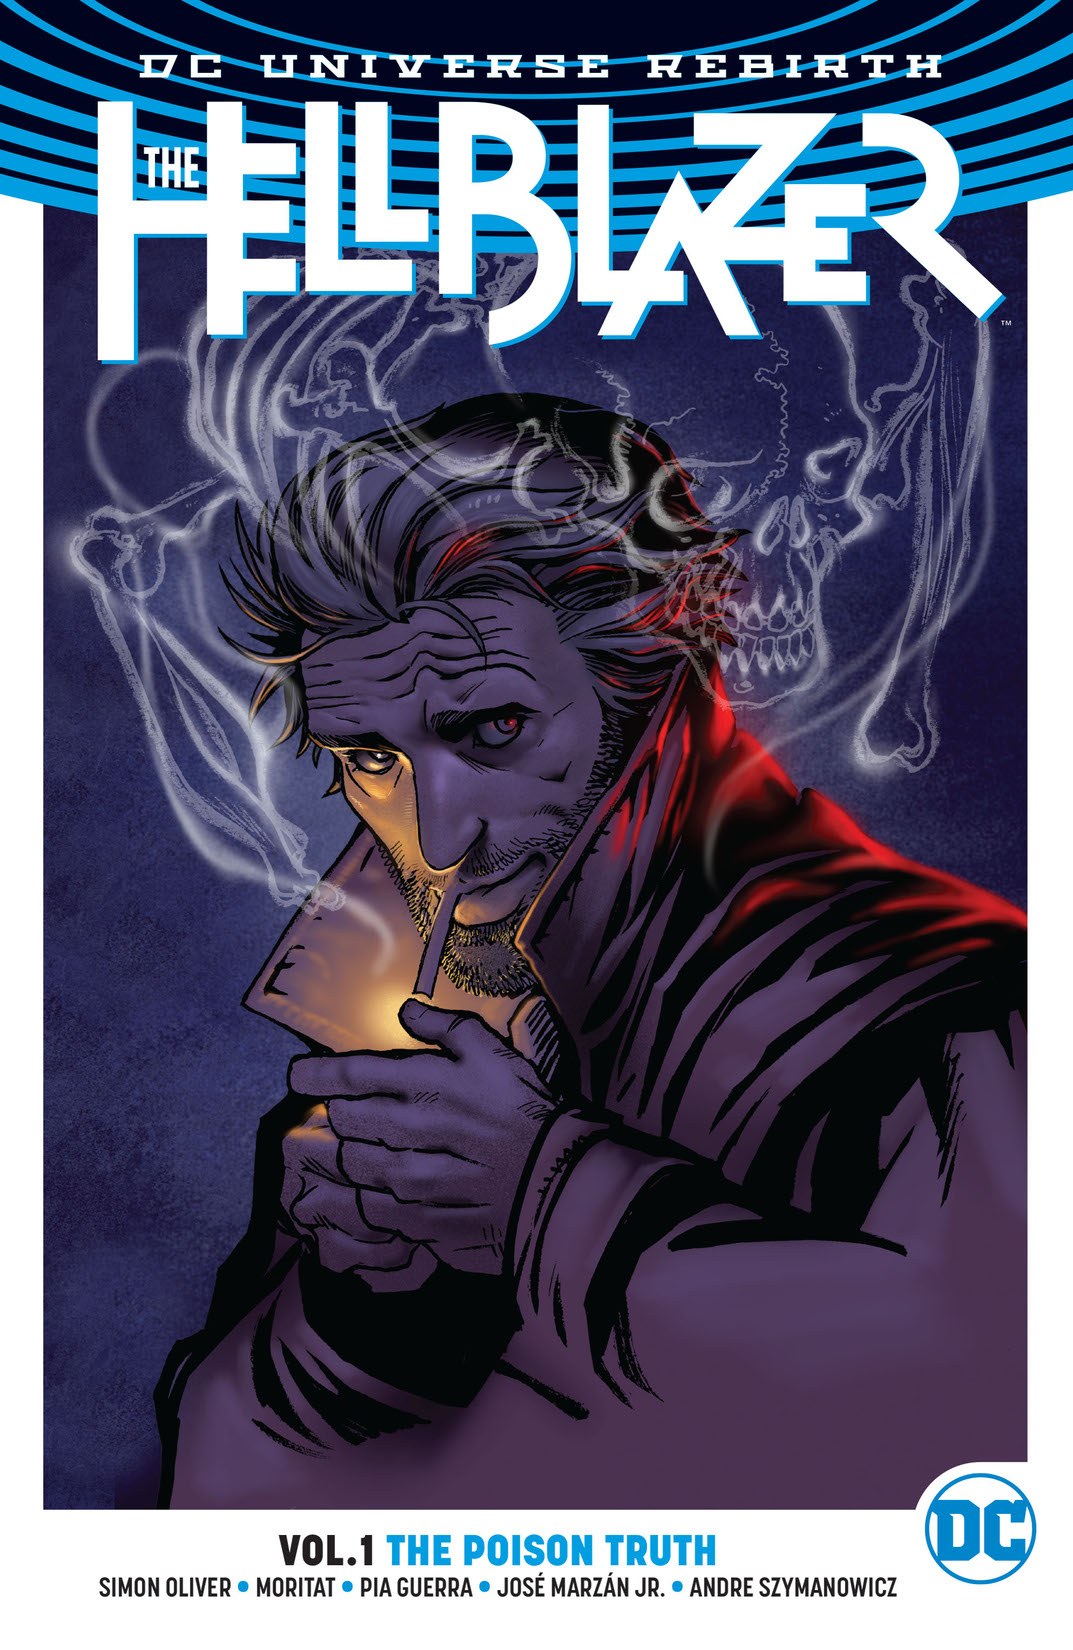 The Hellblazer Vol. 1: The Poison Truth preview images